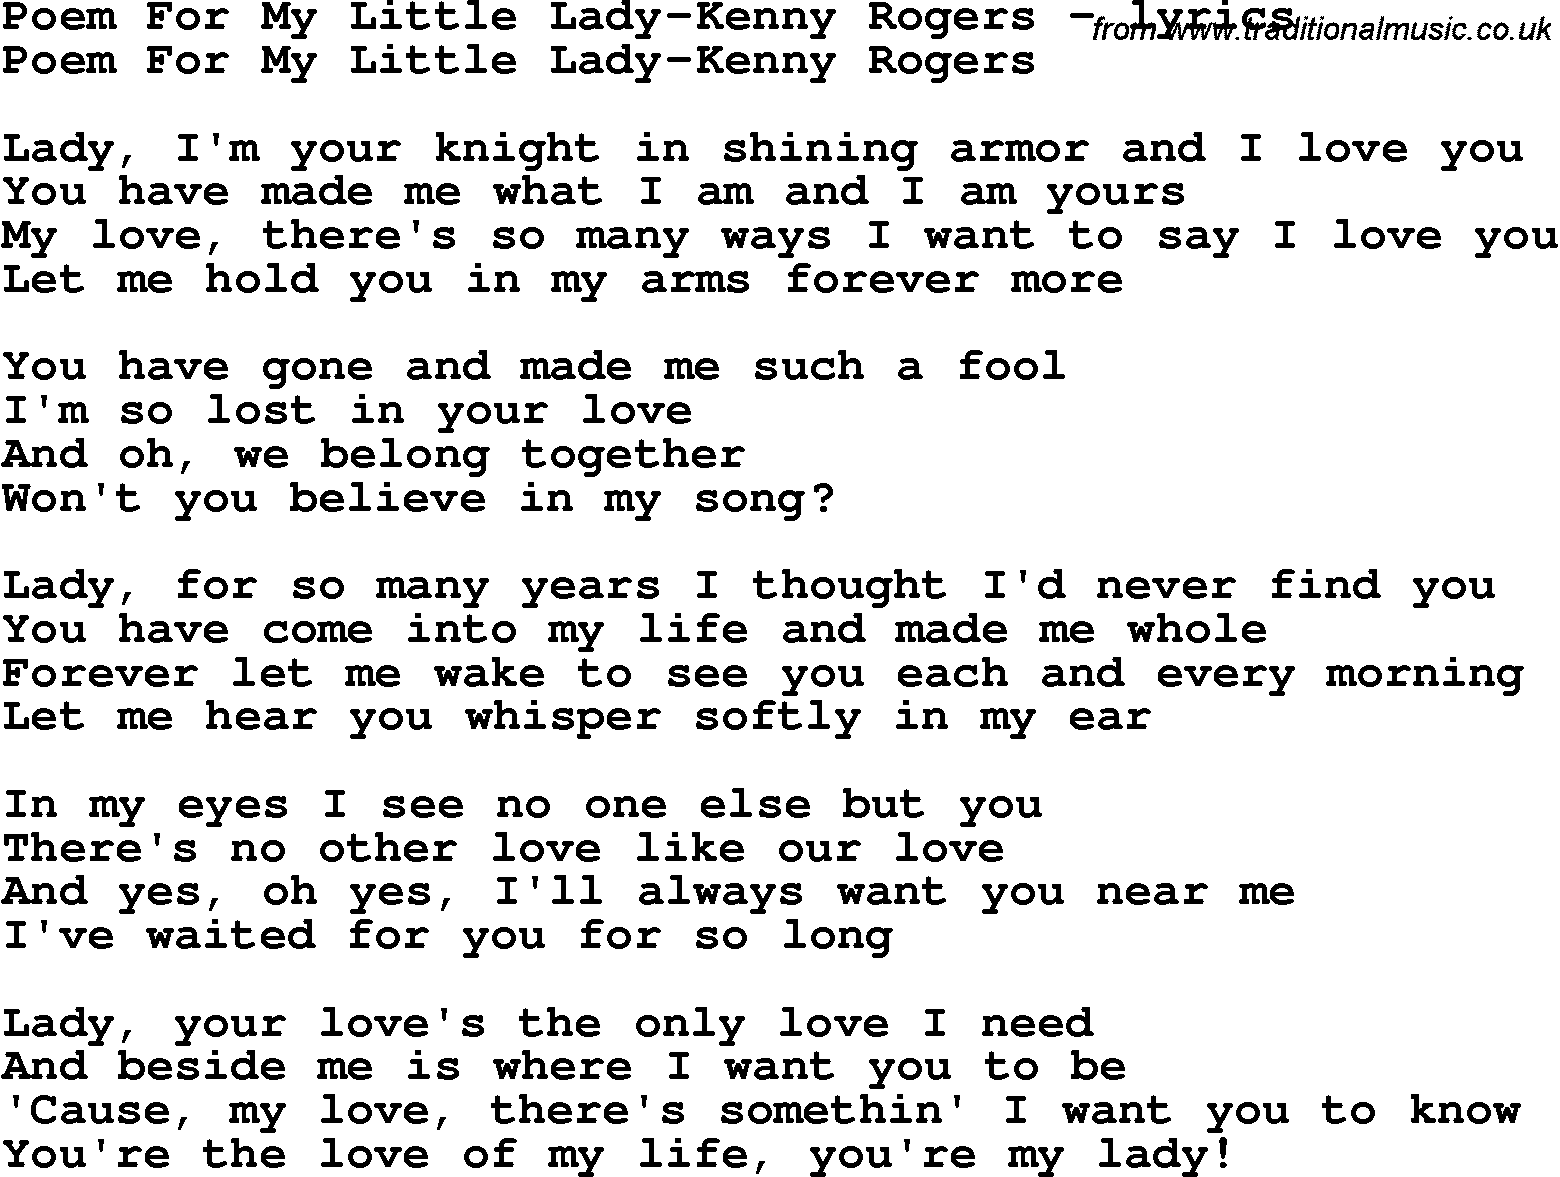 Download Poem For My Little Lady-Kenny Rogers as PDF file (For ...